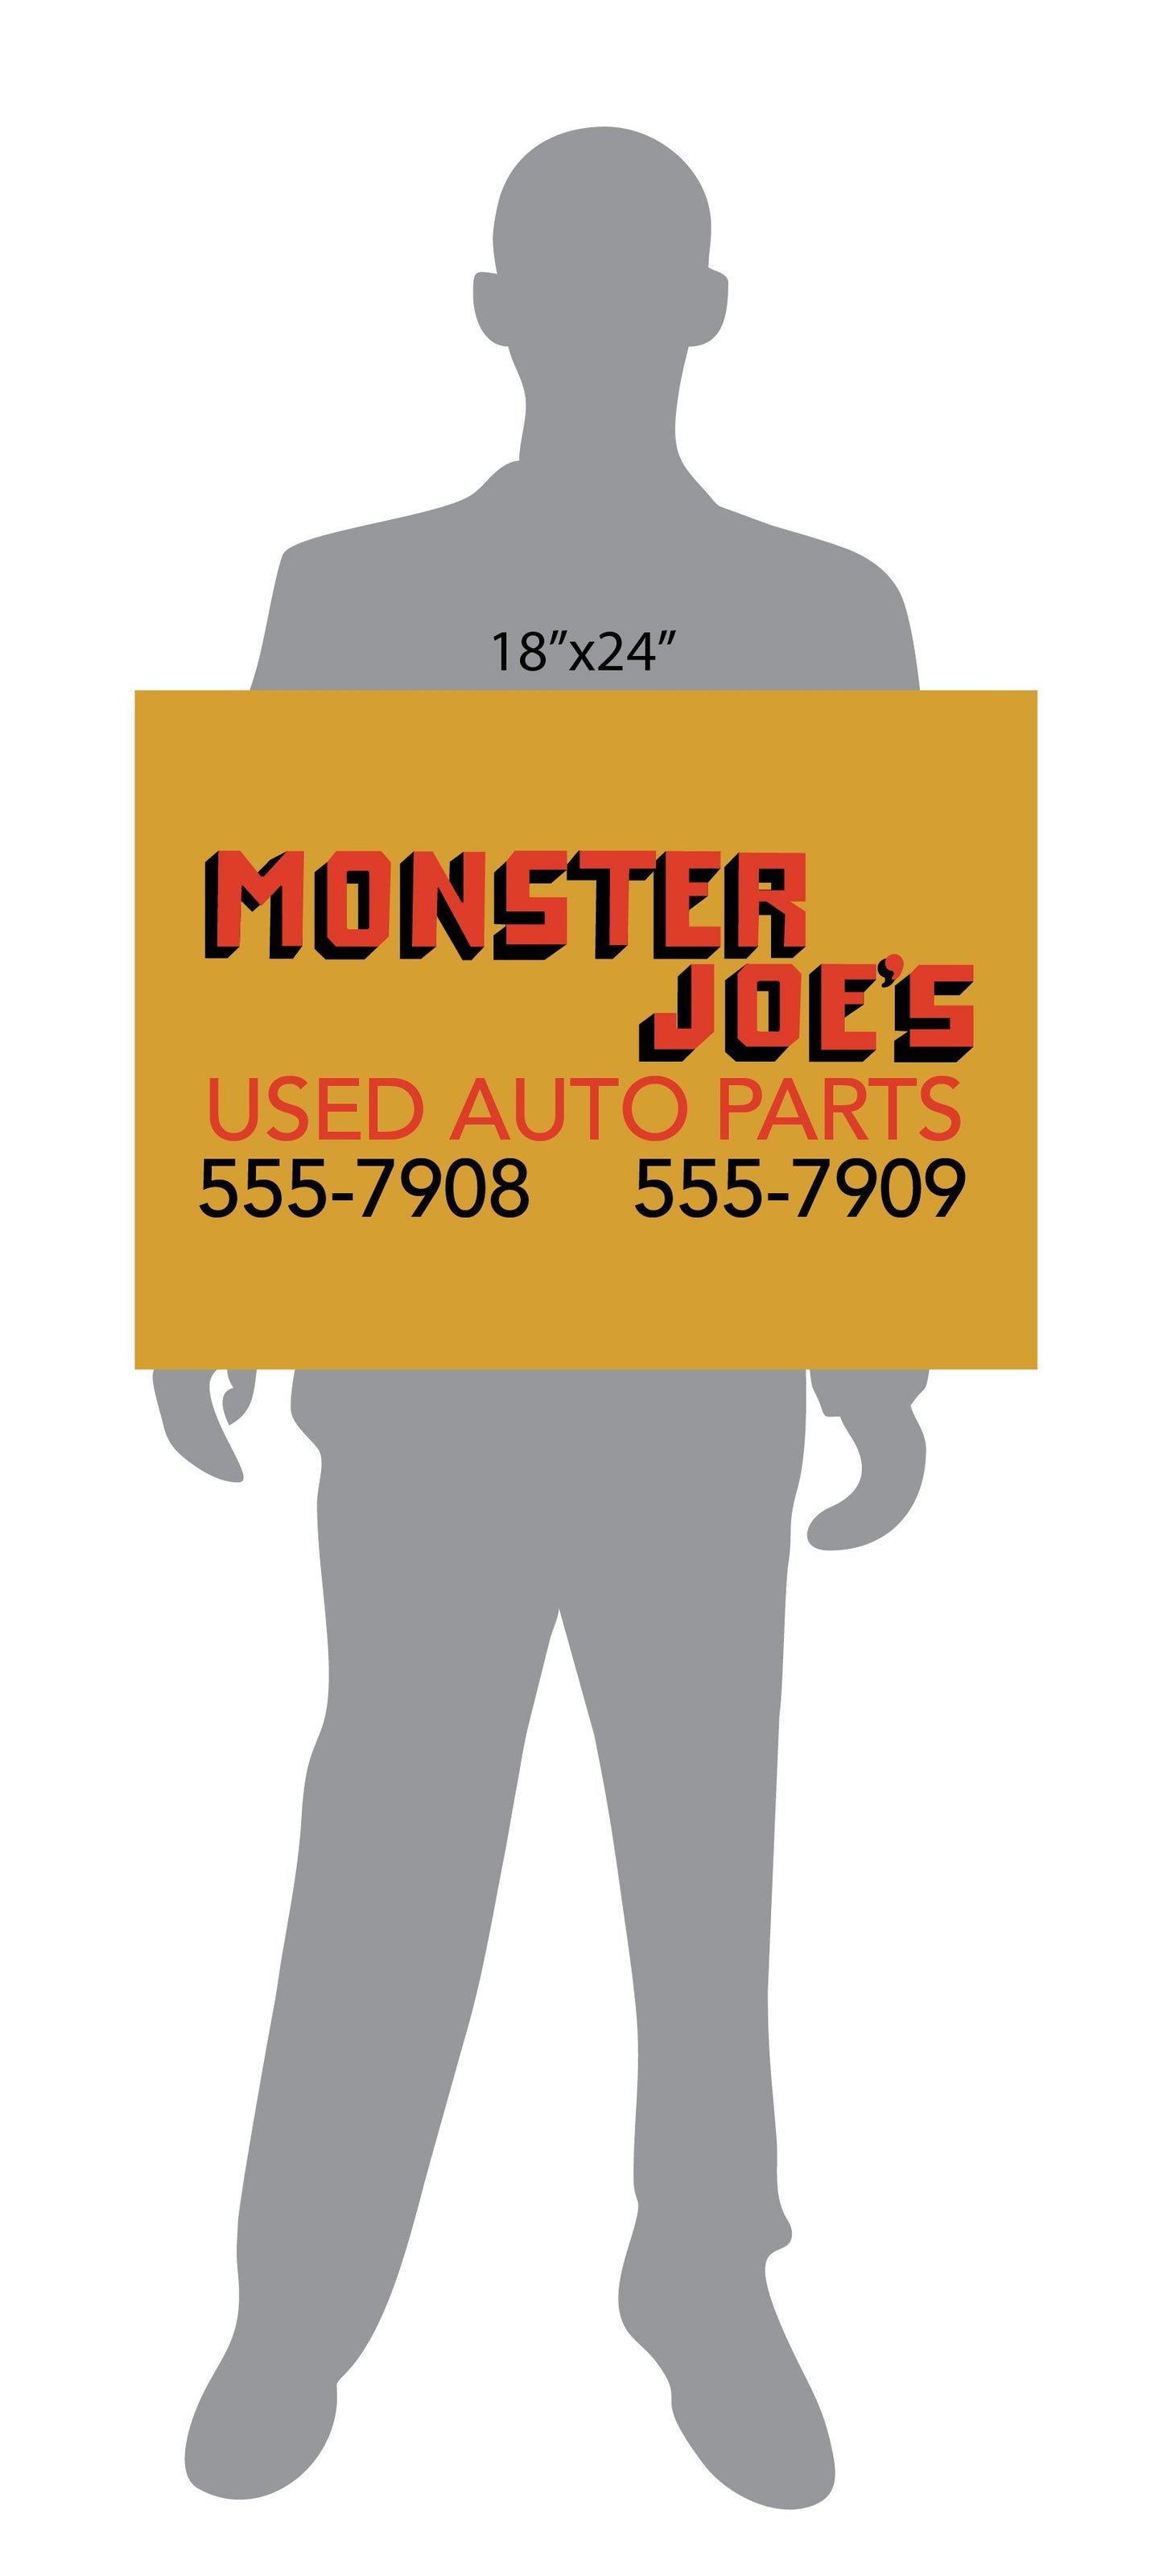 Monster Joe's Used Auto Parts Pulp Fiction Sign